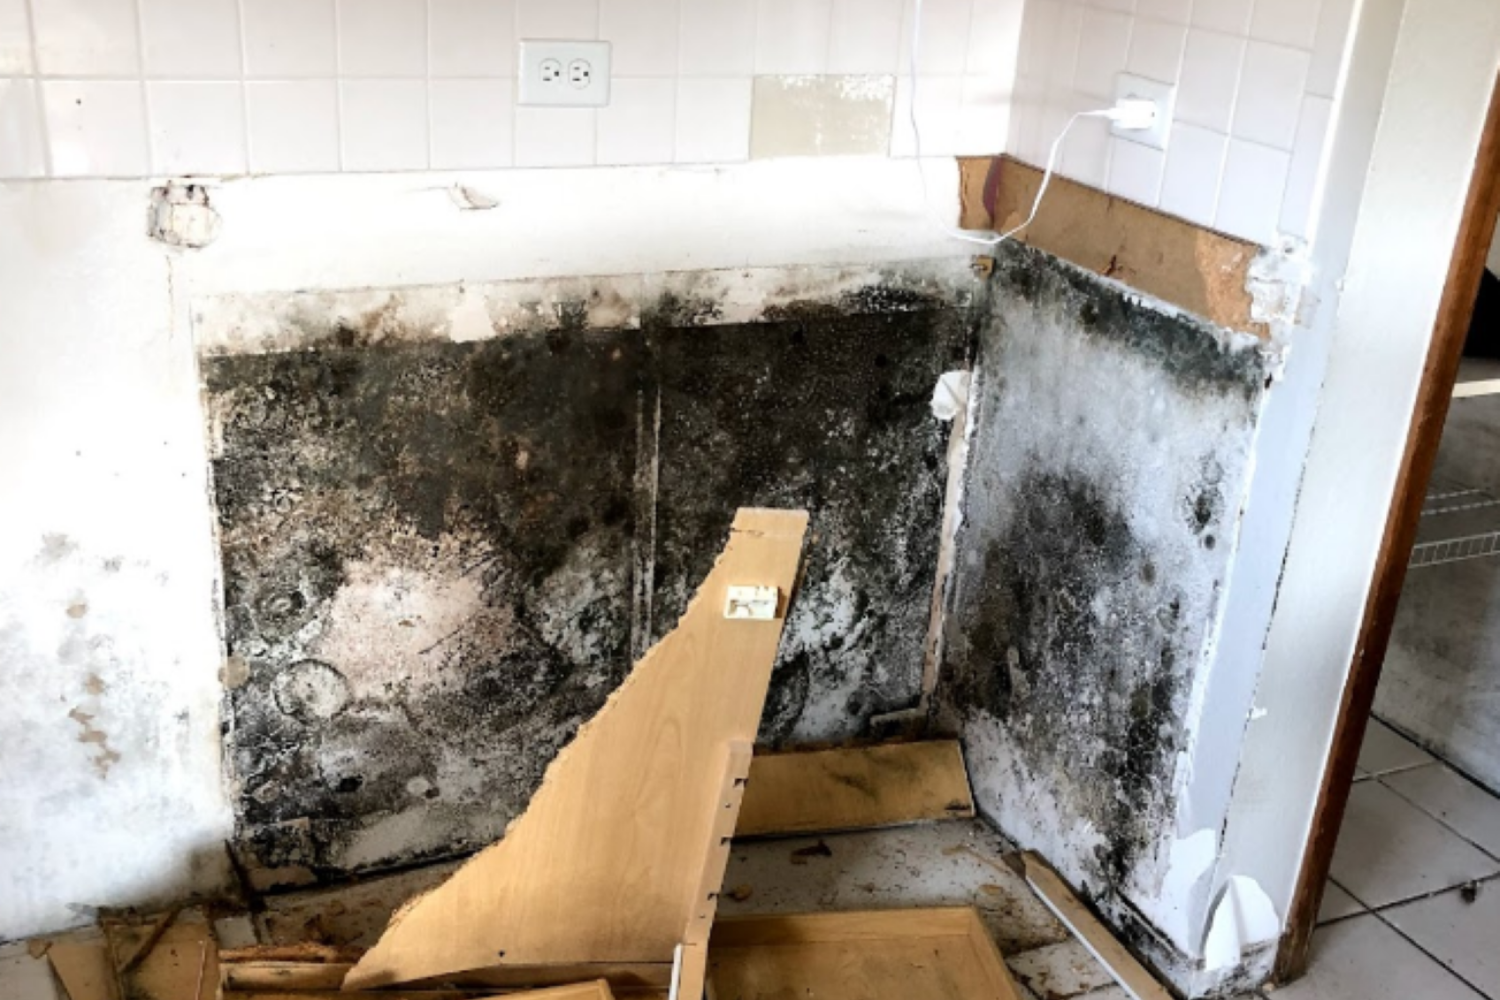 Mold Removal and Contaminated Material Mitigation